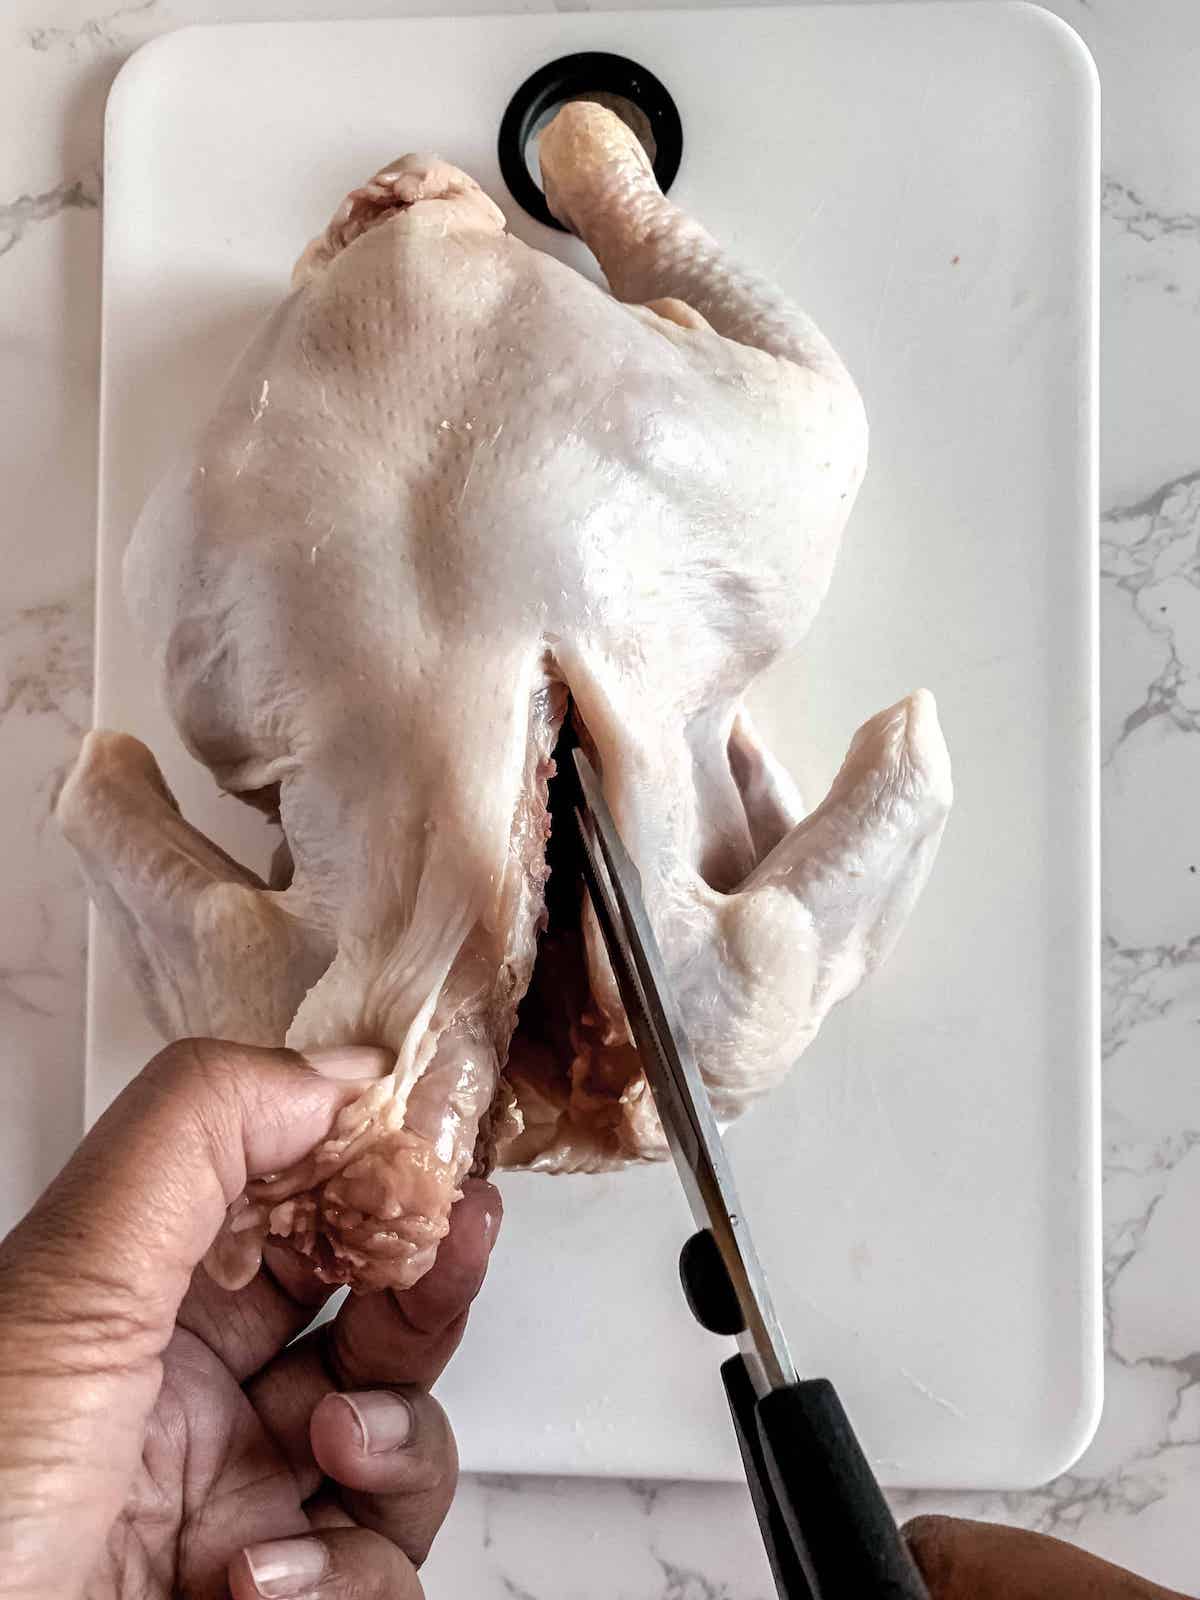 Brown hands using kitchen shears to remove backbone of whole raw chicken.